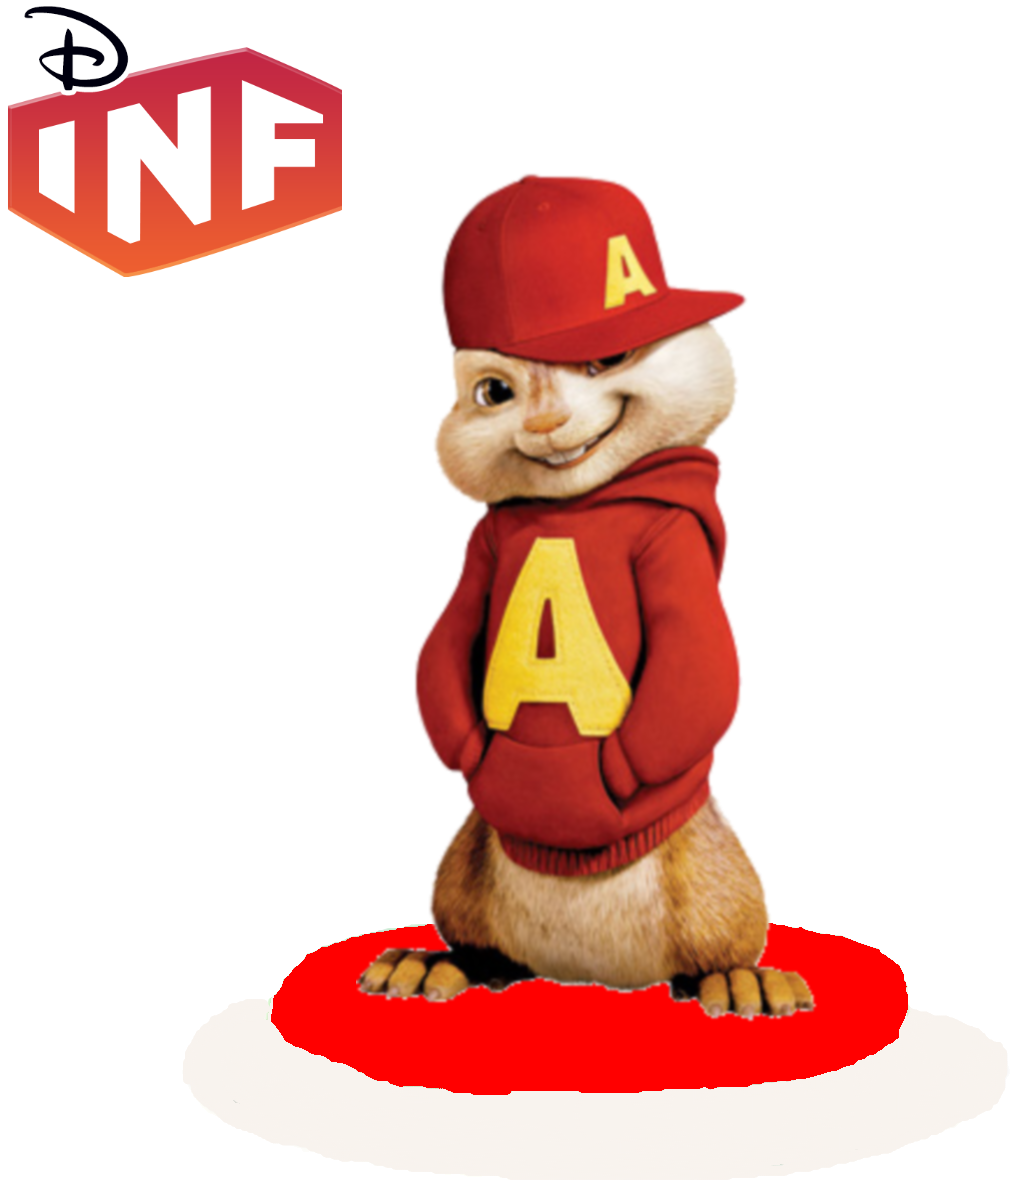 Alvin and the Chipmunks Alvin Wearing Black Tie transparent PNG - StickPNG